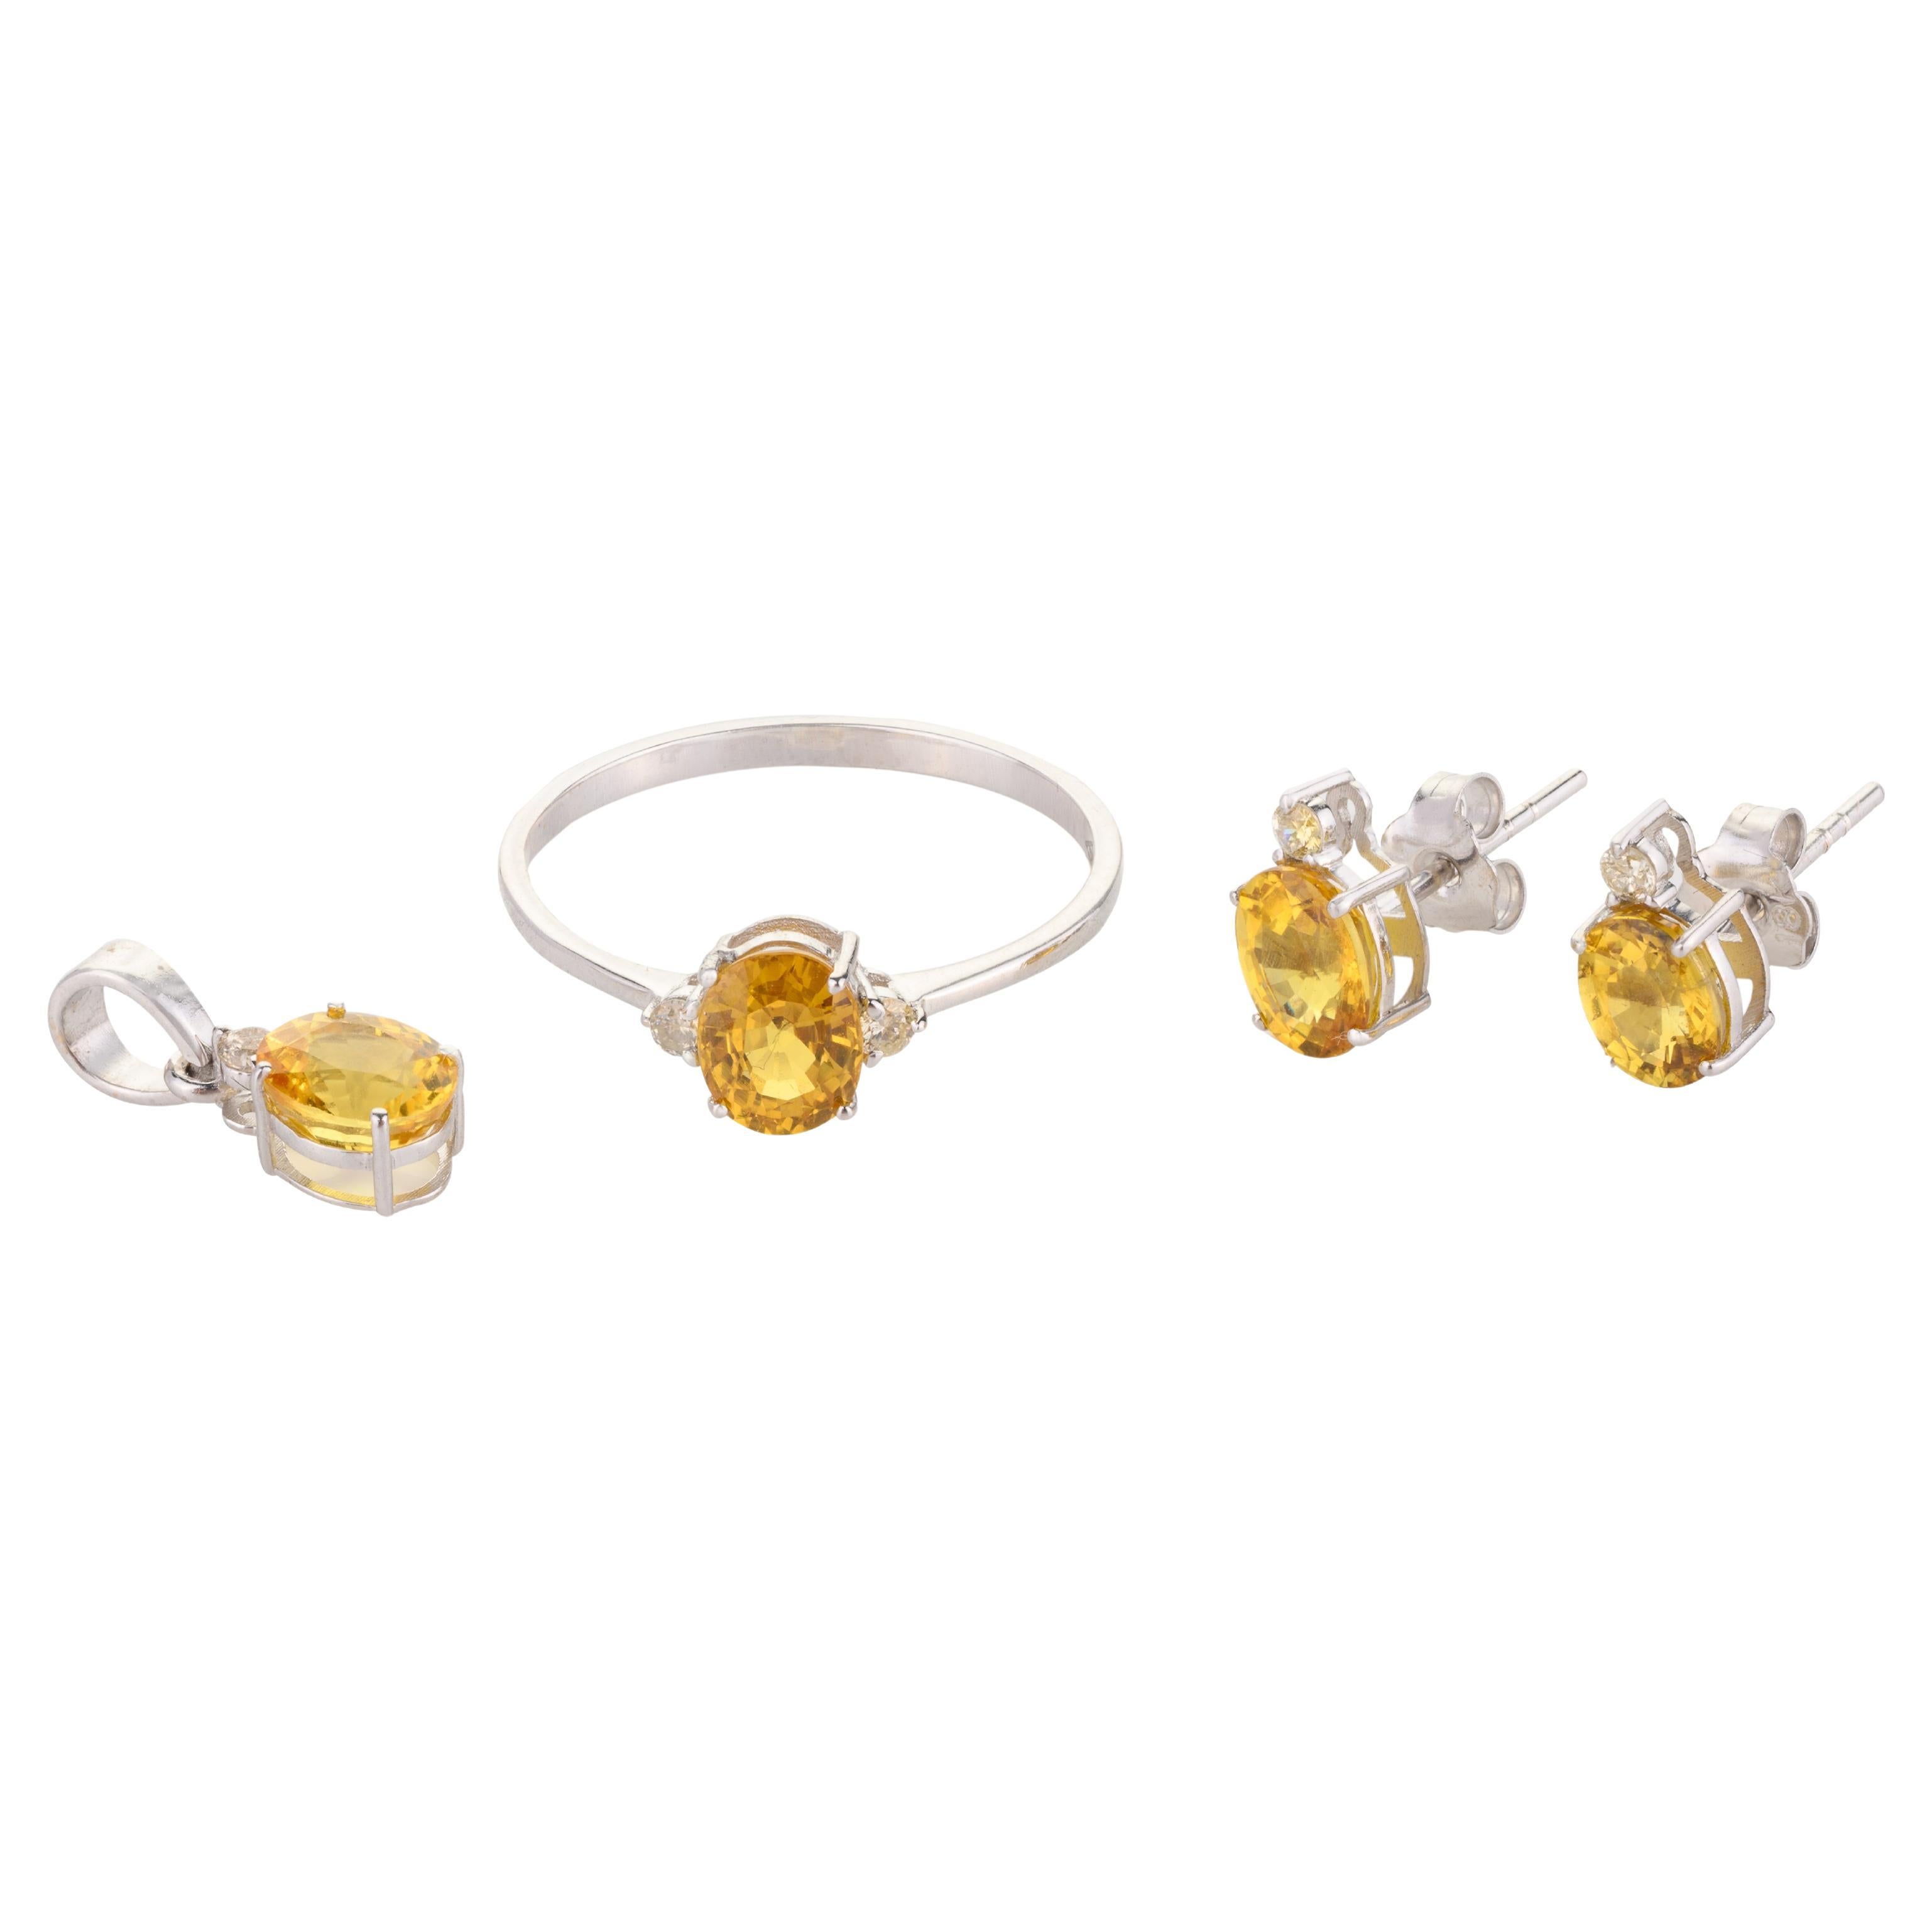 Yellow Sapphire and Diamond Pendant, Ring and Earrings Set in 18k White Gold